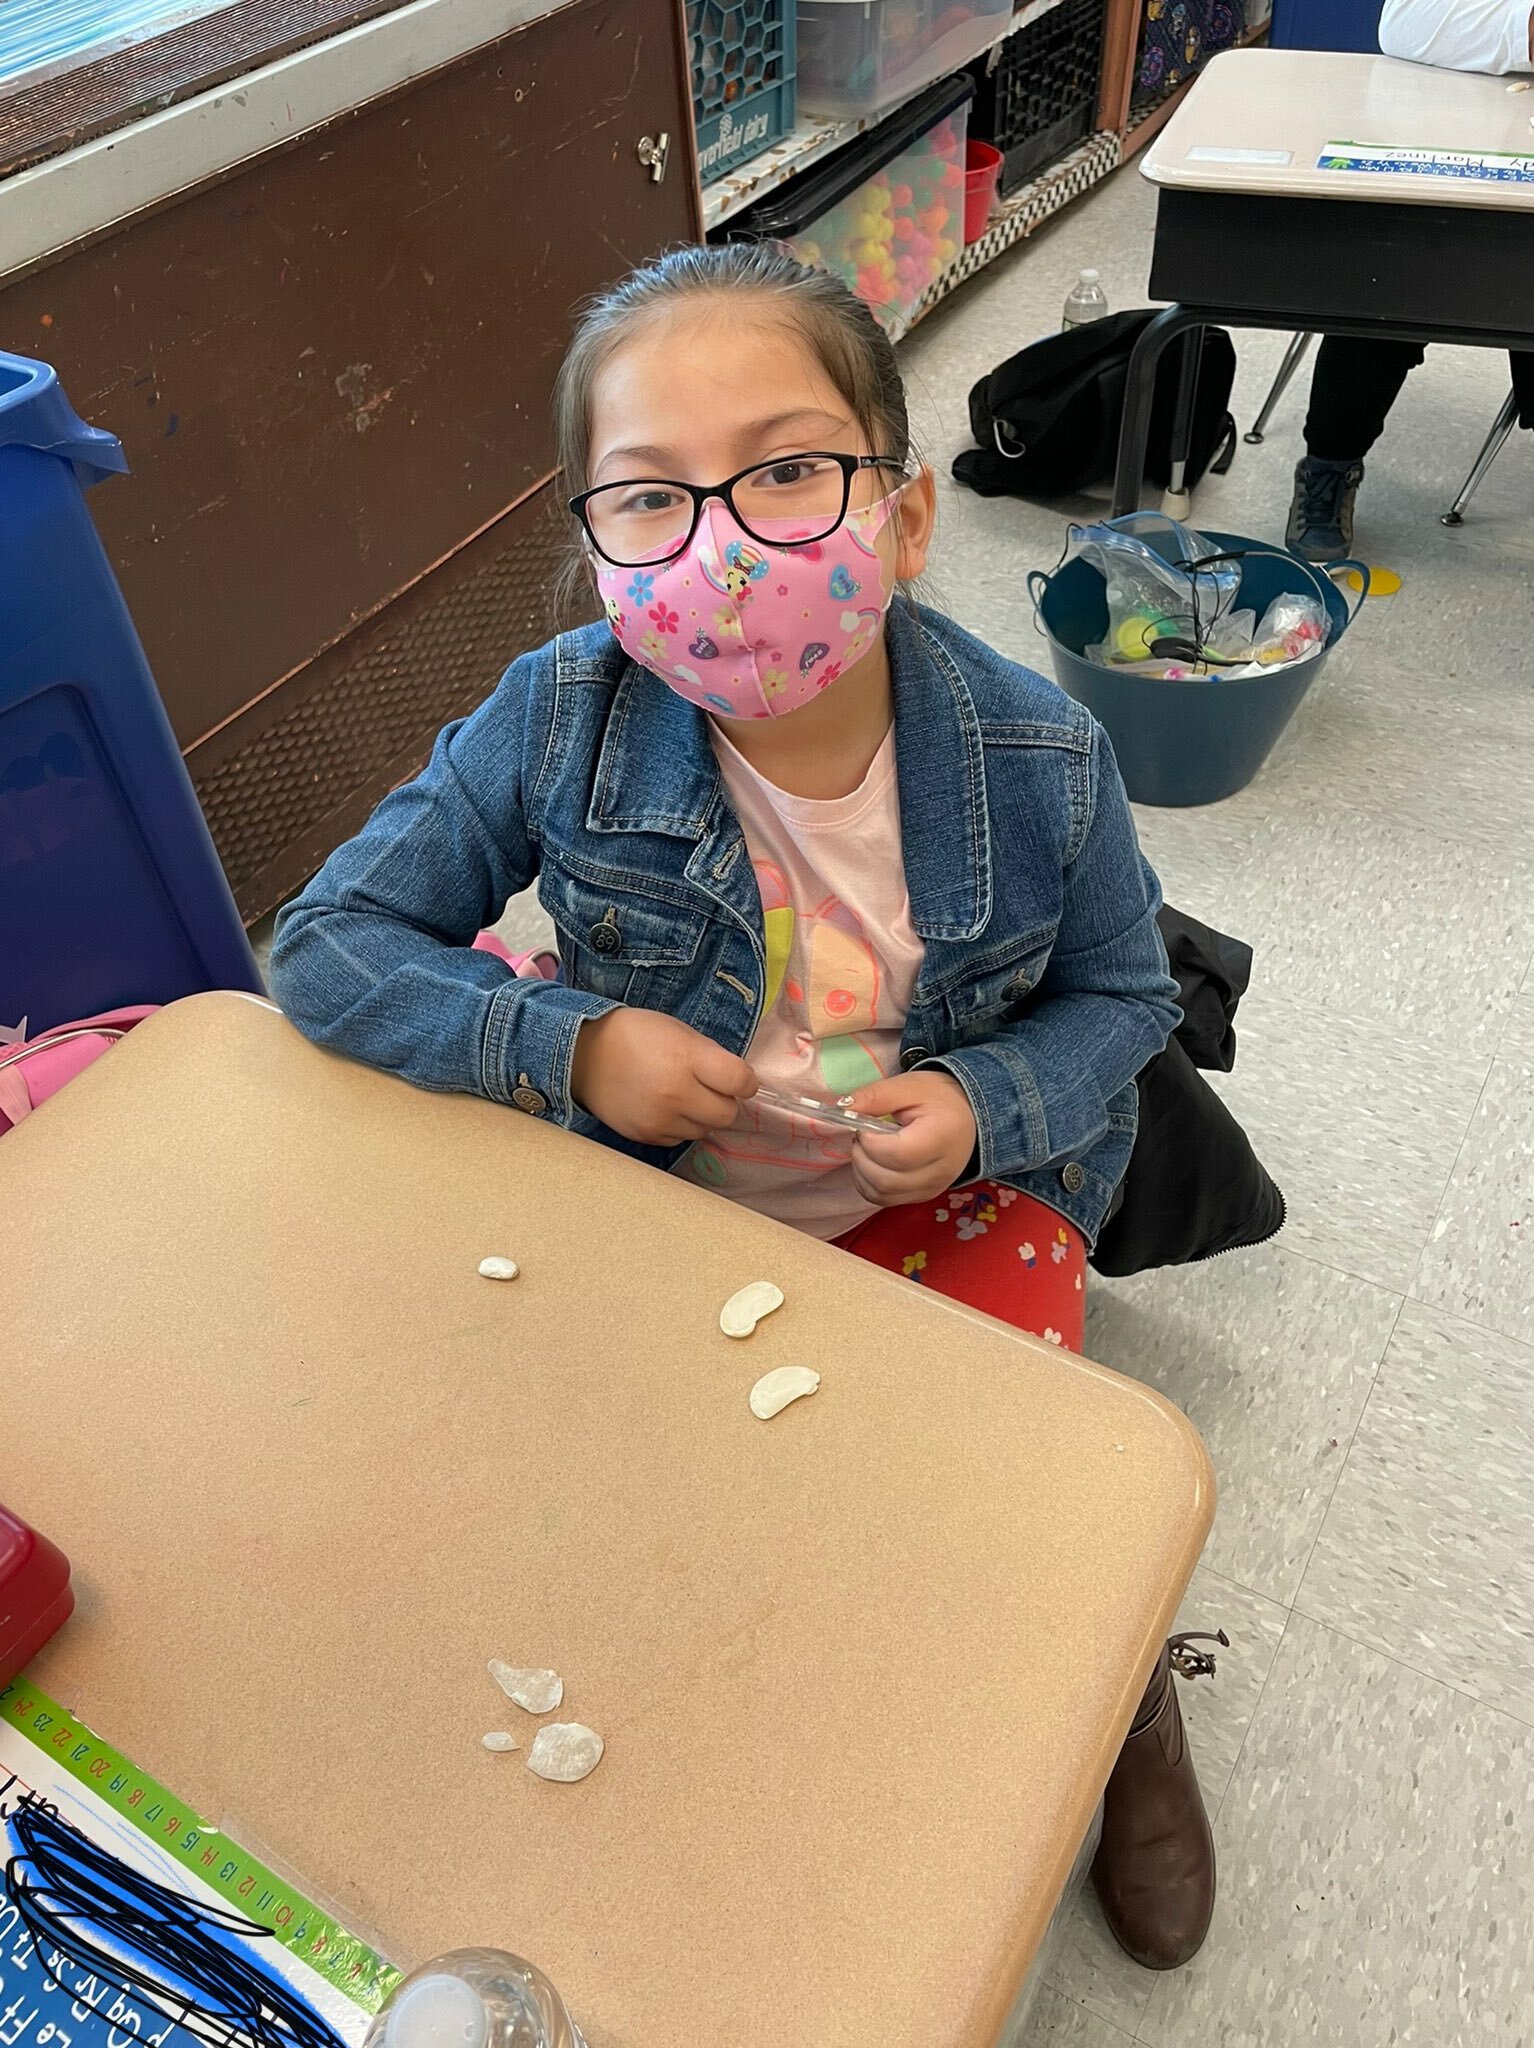 Hampton Bays Elementary School kindergartners in Kathleen Palmieri’s class have been studying plant seeds. They recently soaked lima bean seeds in water, removed the seed coat and explored the various parts of the seed.